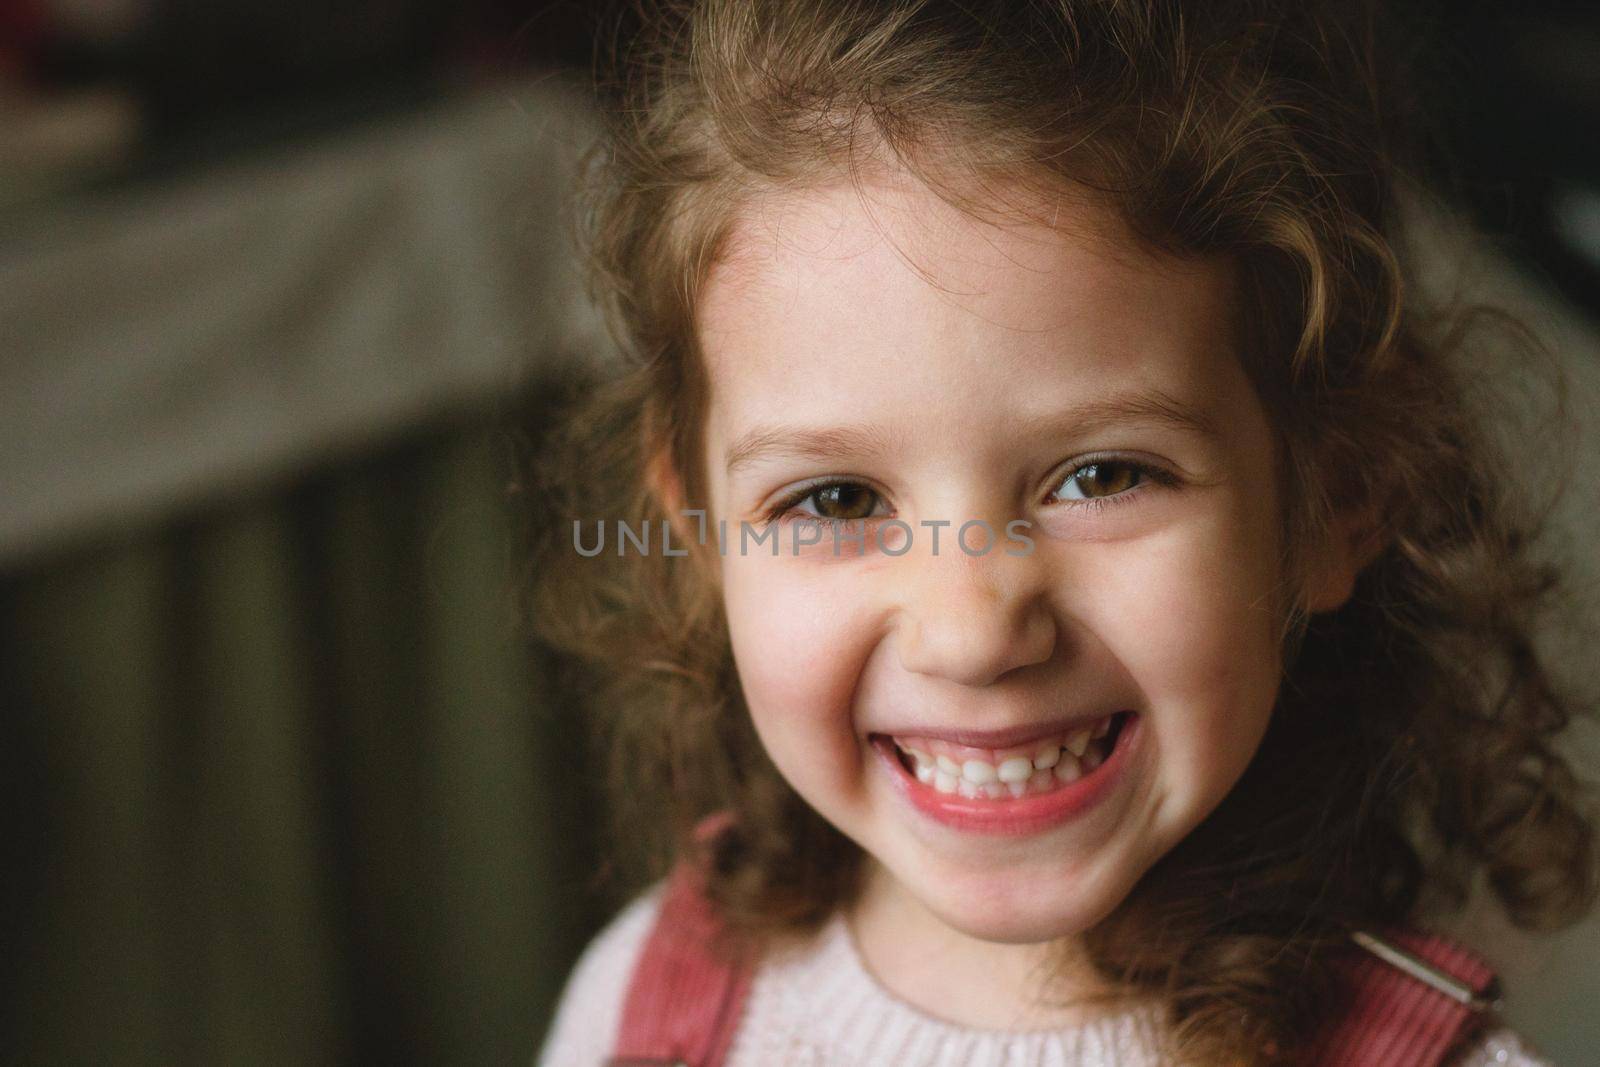 Close-up portrait of a cute little white caucasian girl with a cheeky smile and expression on her face looking directly at the camera